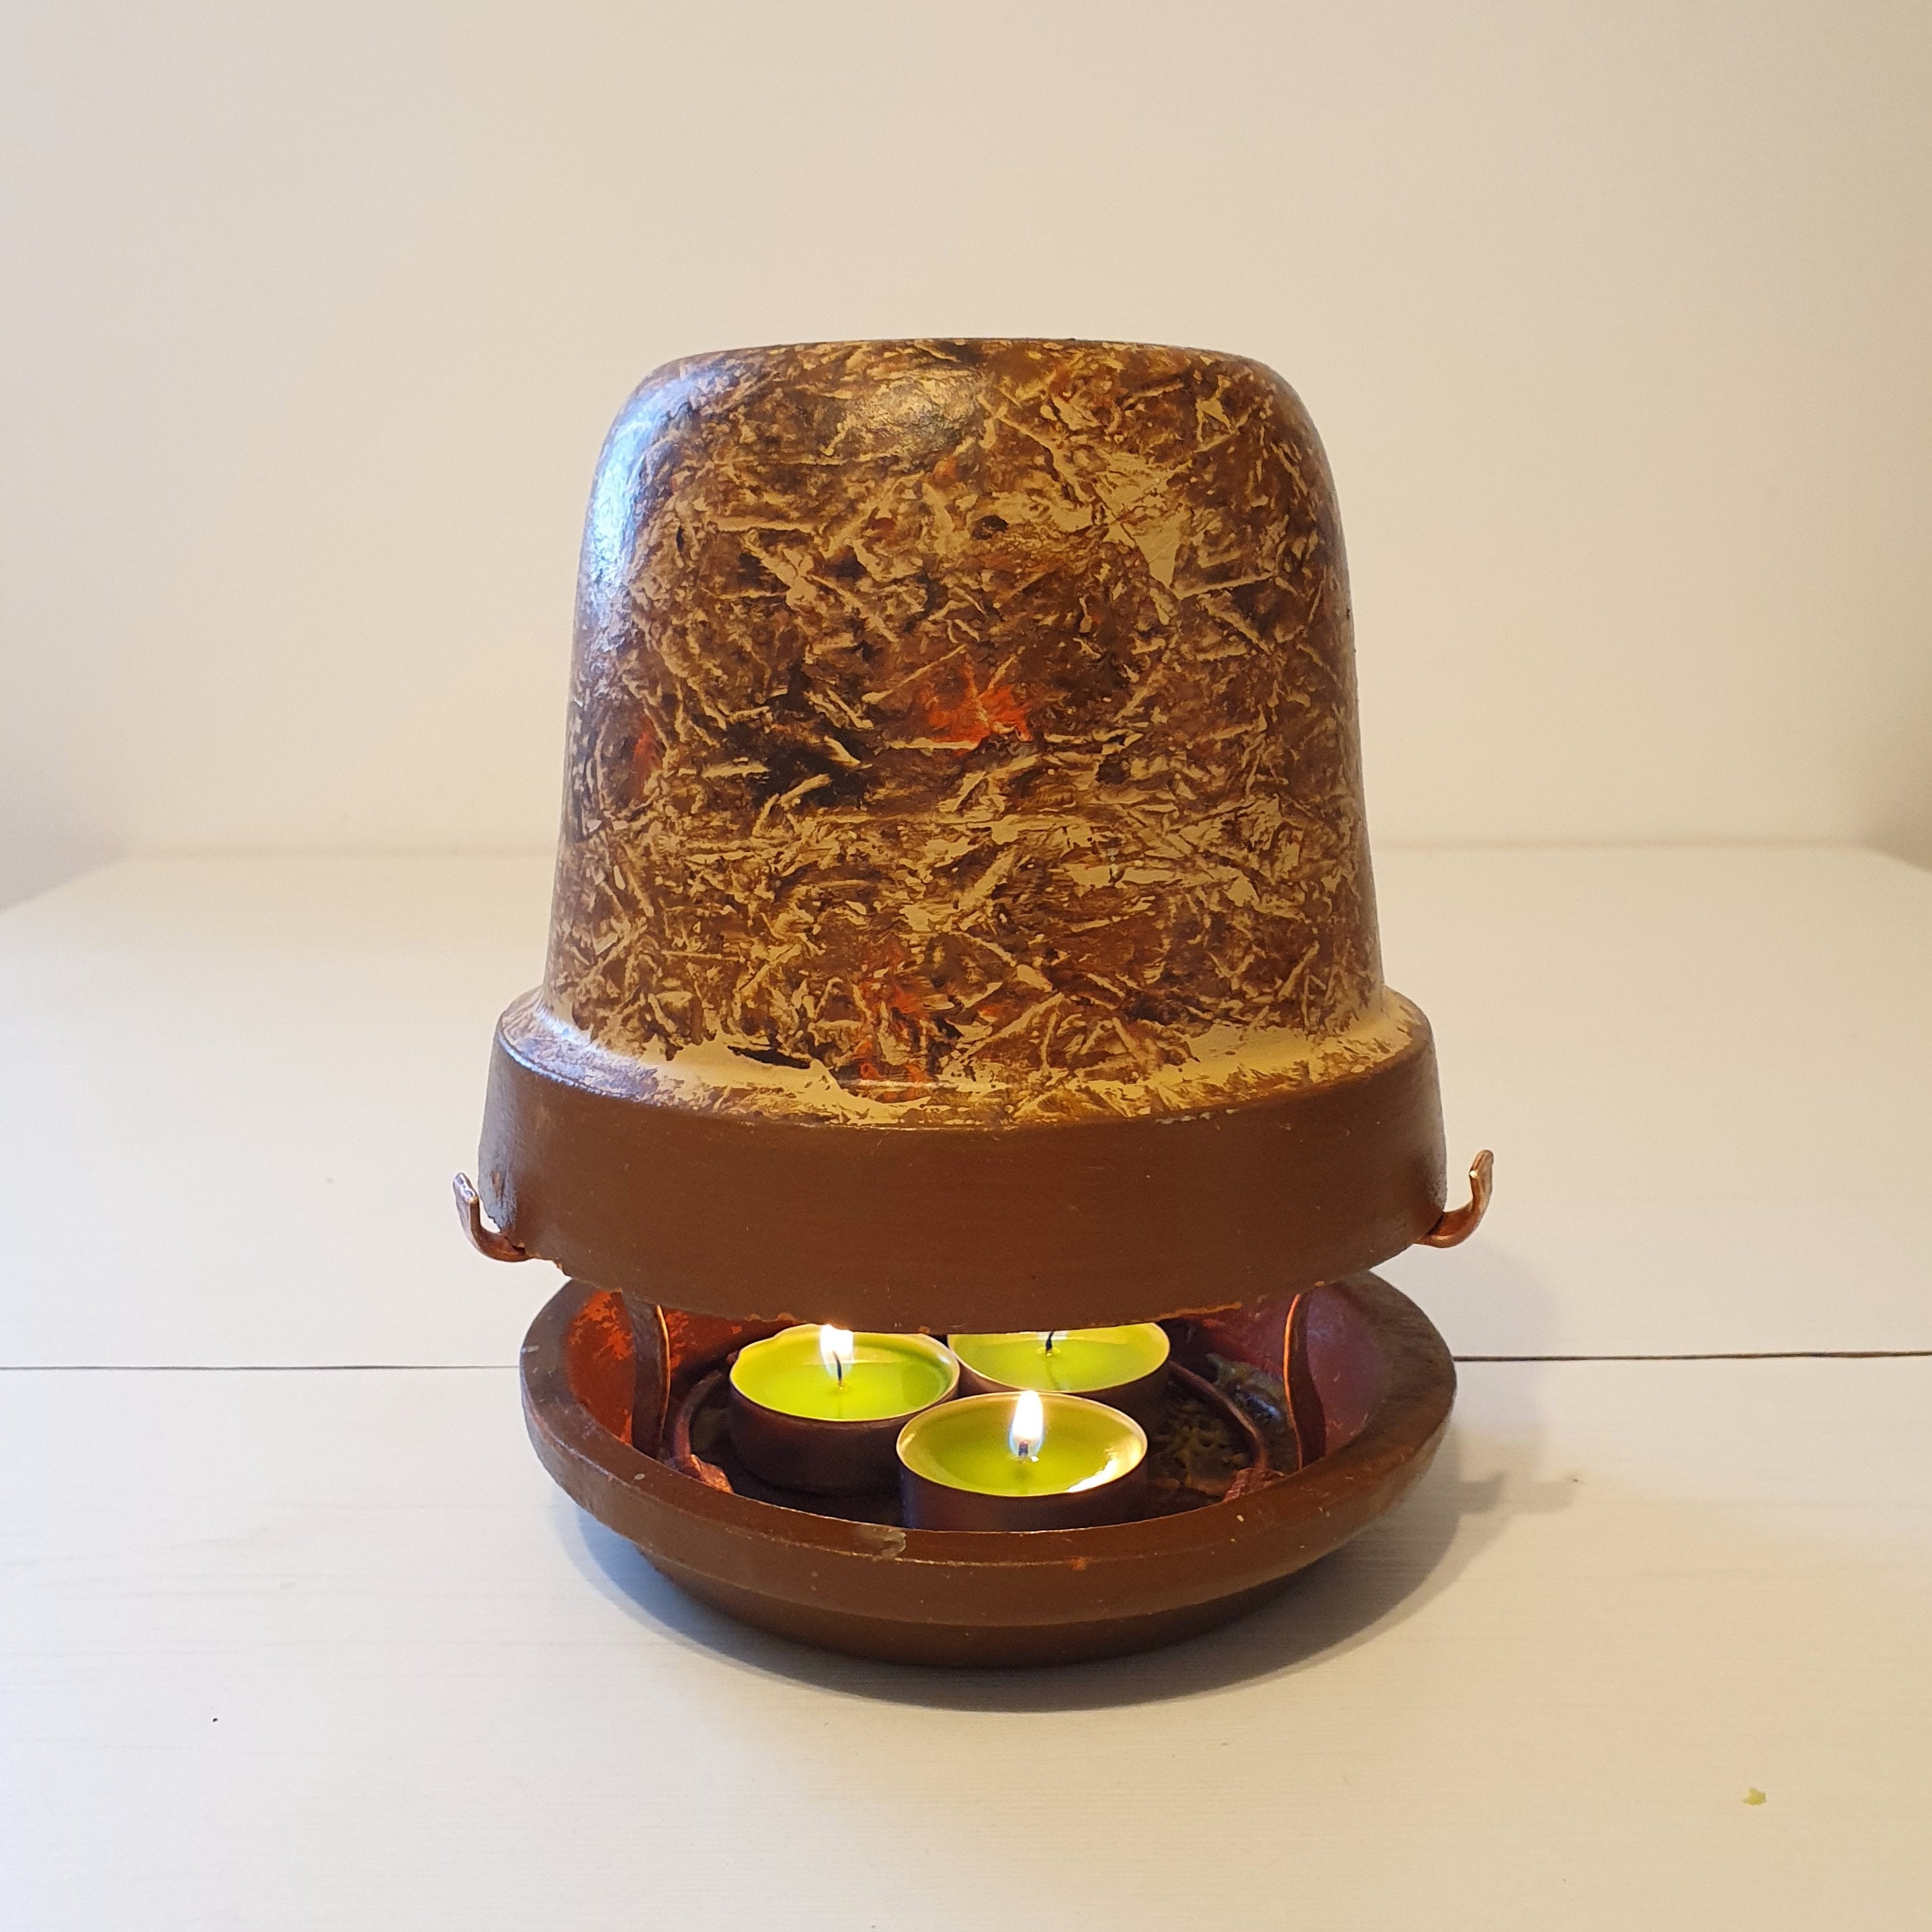  Candle Heater-Home Heater-Domeheat-Natural Heater,Mumsobasi,mum  isitici,Pottery Heater-The Most Funcional Size 10 x 10 inches-Terracotta :  Handmade Products